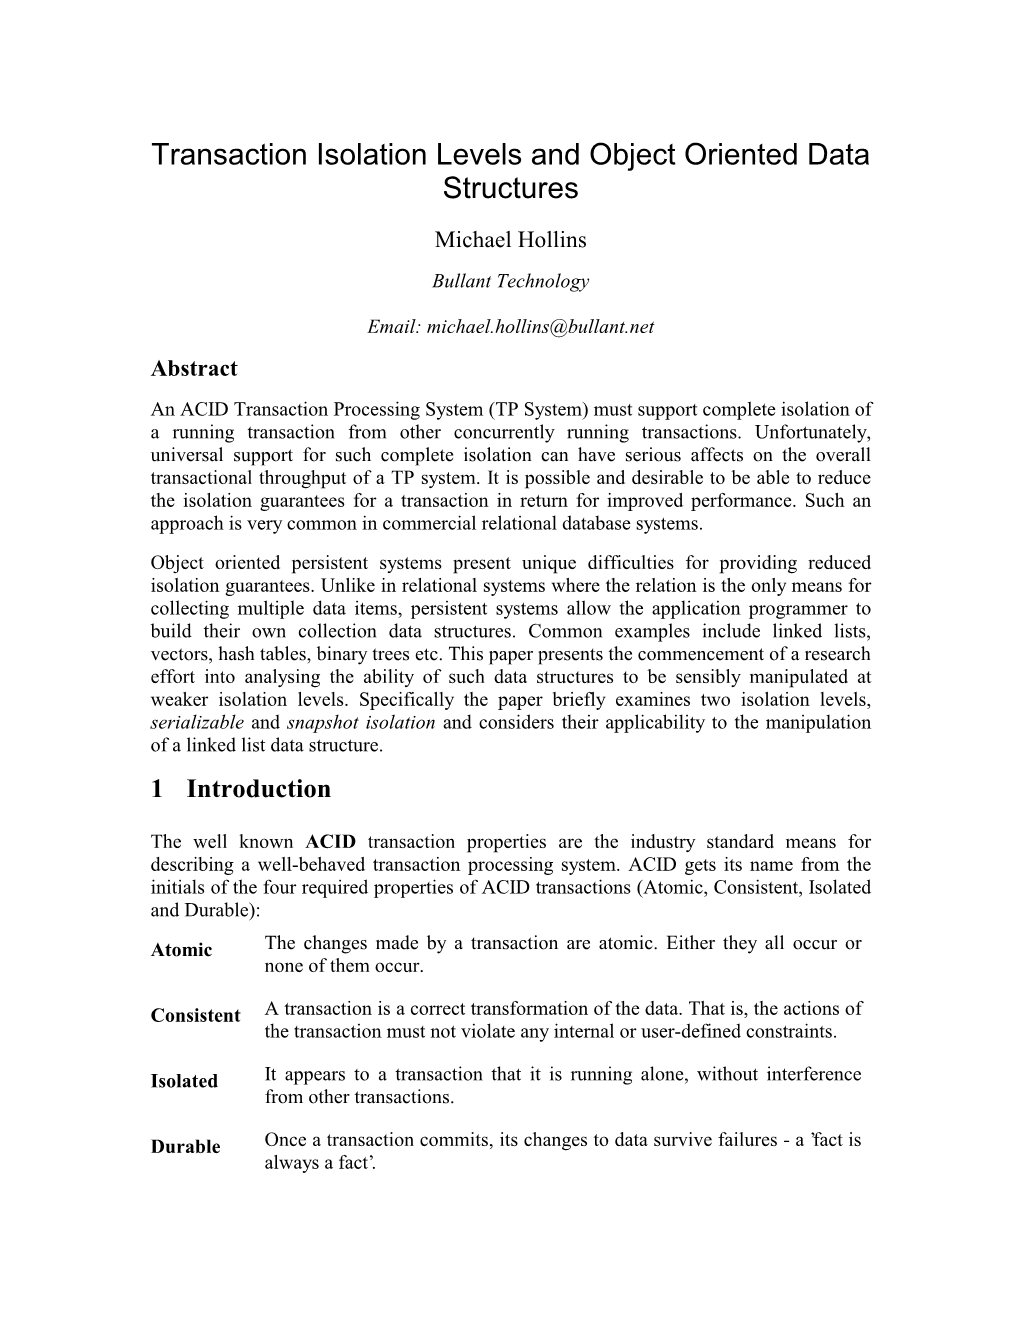 Transaction Isolation Levels and Object Oriented Data Structures